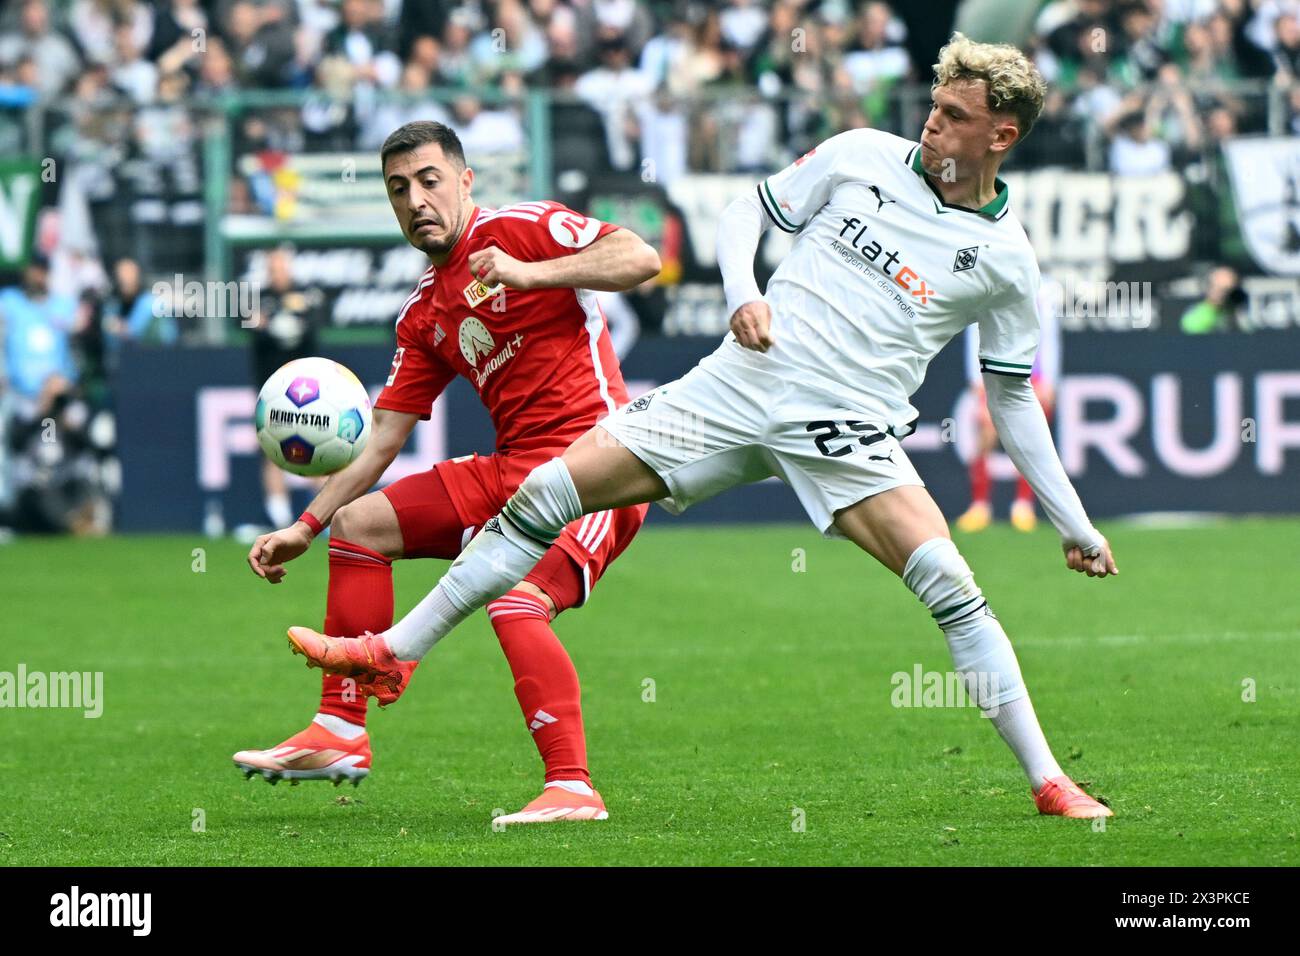 28 April 2024, North Rhine-Westphalia, Mönchengladbach: Soccer: Bundesliga, Borussia Mönchengladbach - 1. FC Union Berlin, matchday 31, Borussia-Park stadium. Mönchengladbach's Robin Hack (r) and Berlin's Josip Juranovic fight for the ball. Photo: Federico Gambarini/dpa - IMPORTANT NOTE: In accordance with the regulations of the DFL German Football League and the DFB German Football Association, it is prohibited to utilize or have utilized photographs taken in the stadium and/or of the match in the form of sequential images and/or video-like photo series. Stock Photo